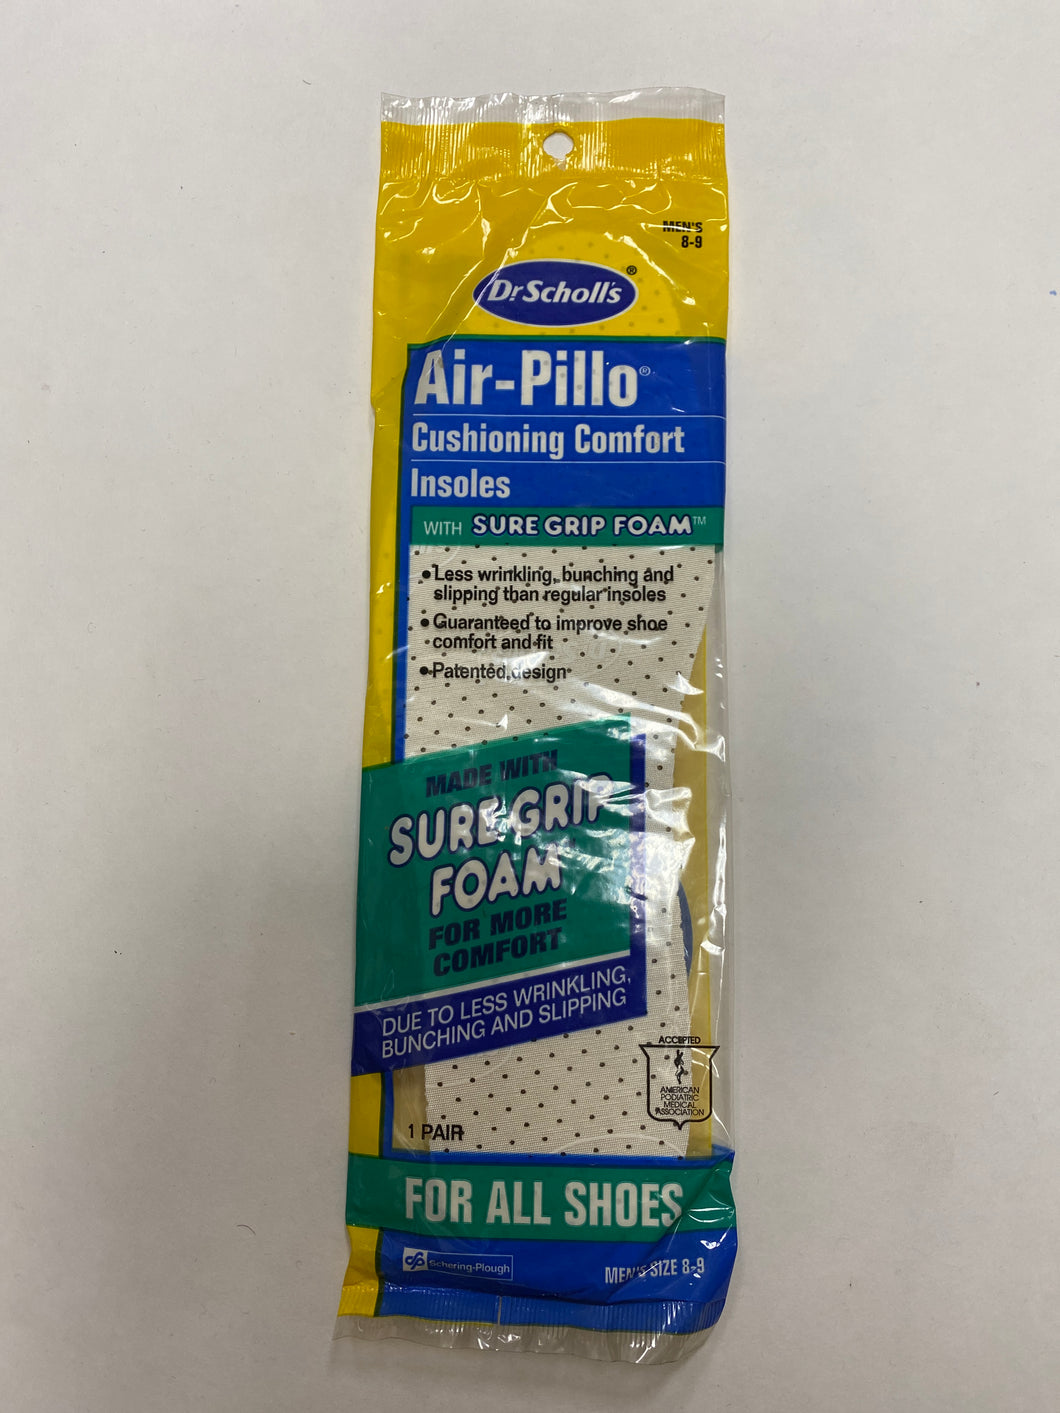 Dr. Scholl’s Air Pillo Cushioning Comfort Insoles